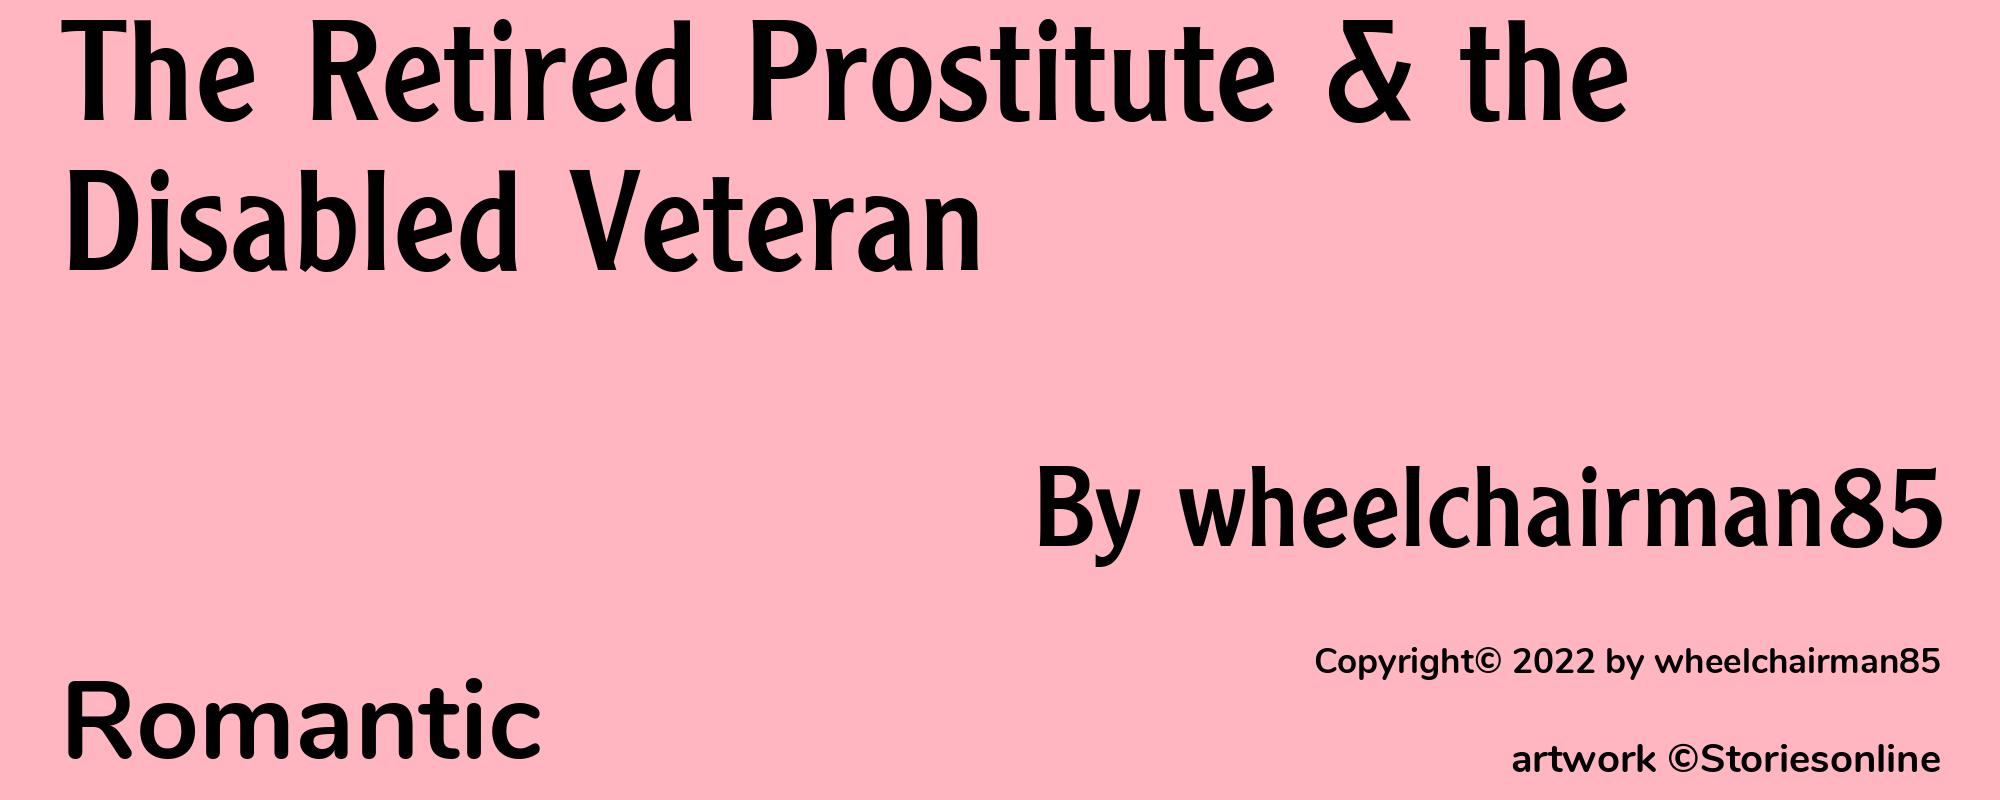 The Retired Prostitute & the Disabled Veteran - Cover